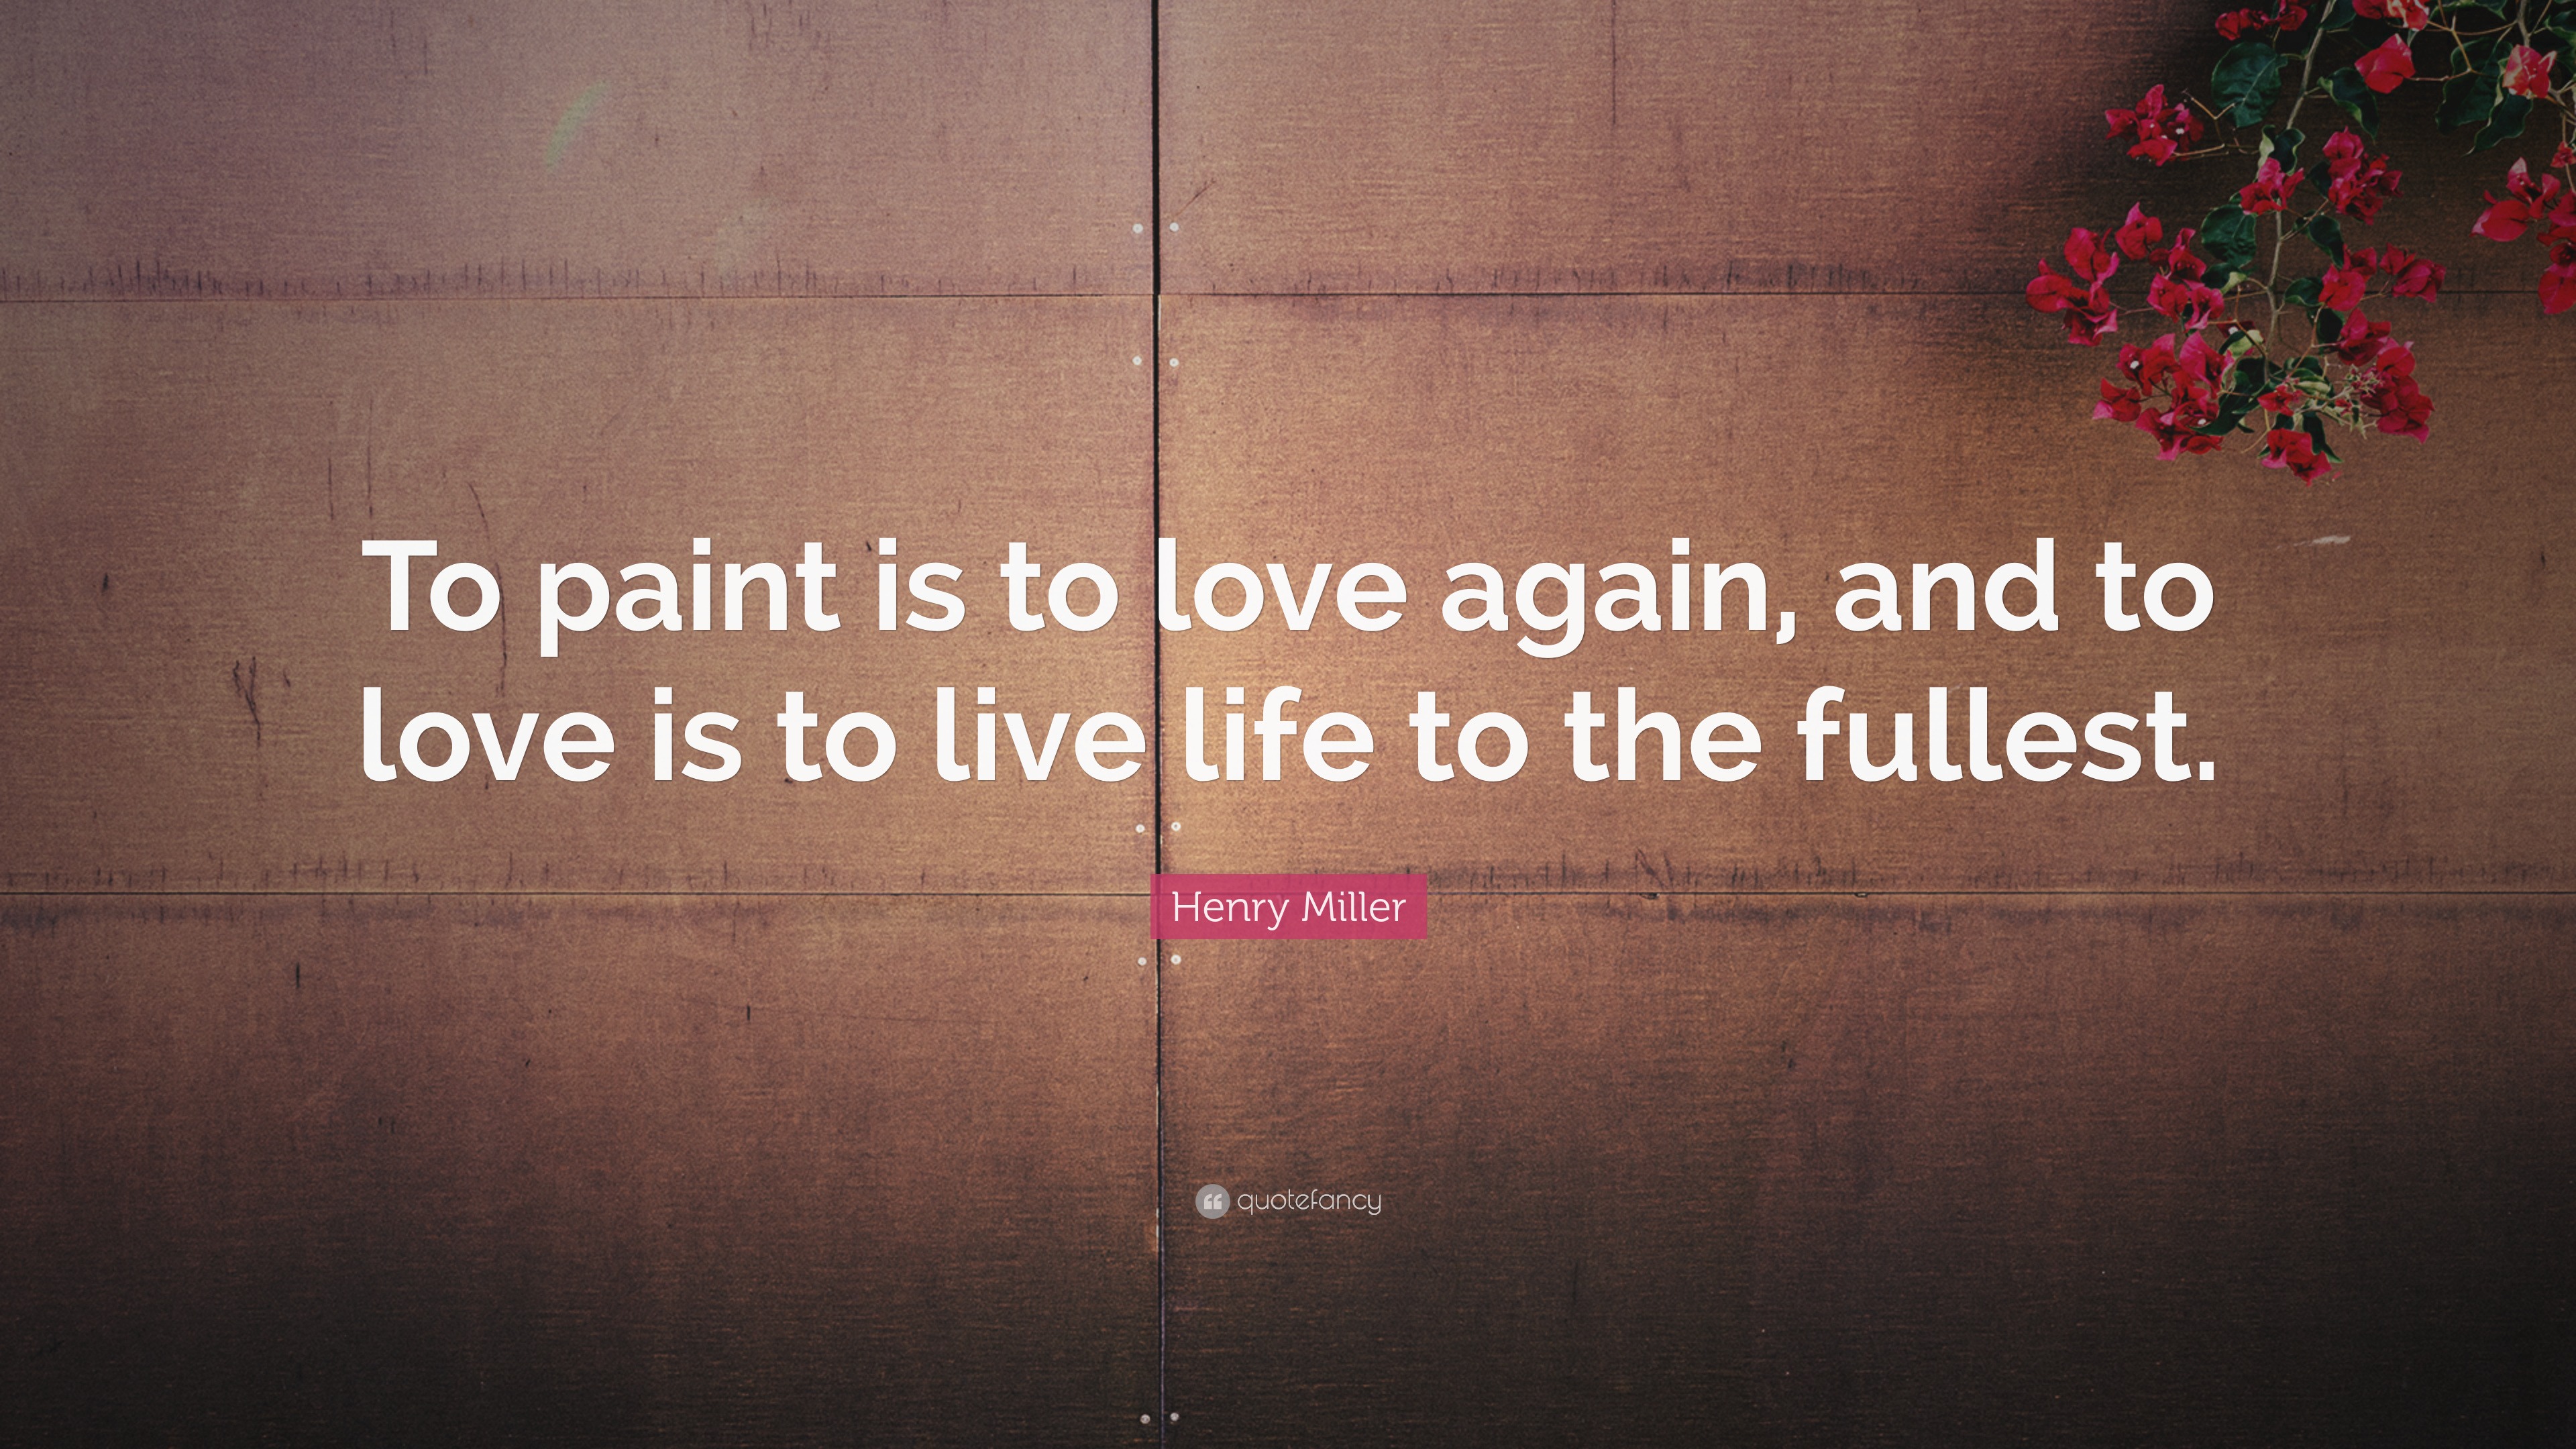 Henry Miller Quote “To paint is to love again and to love is